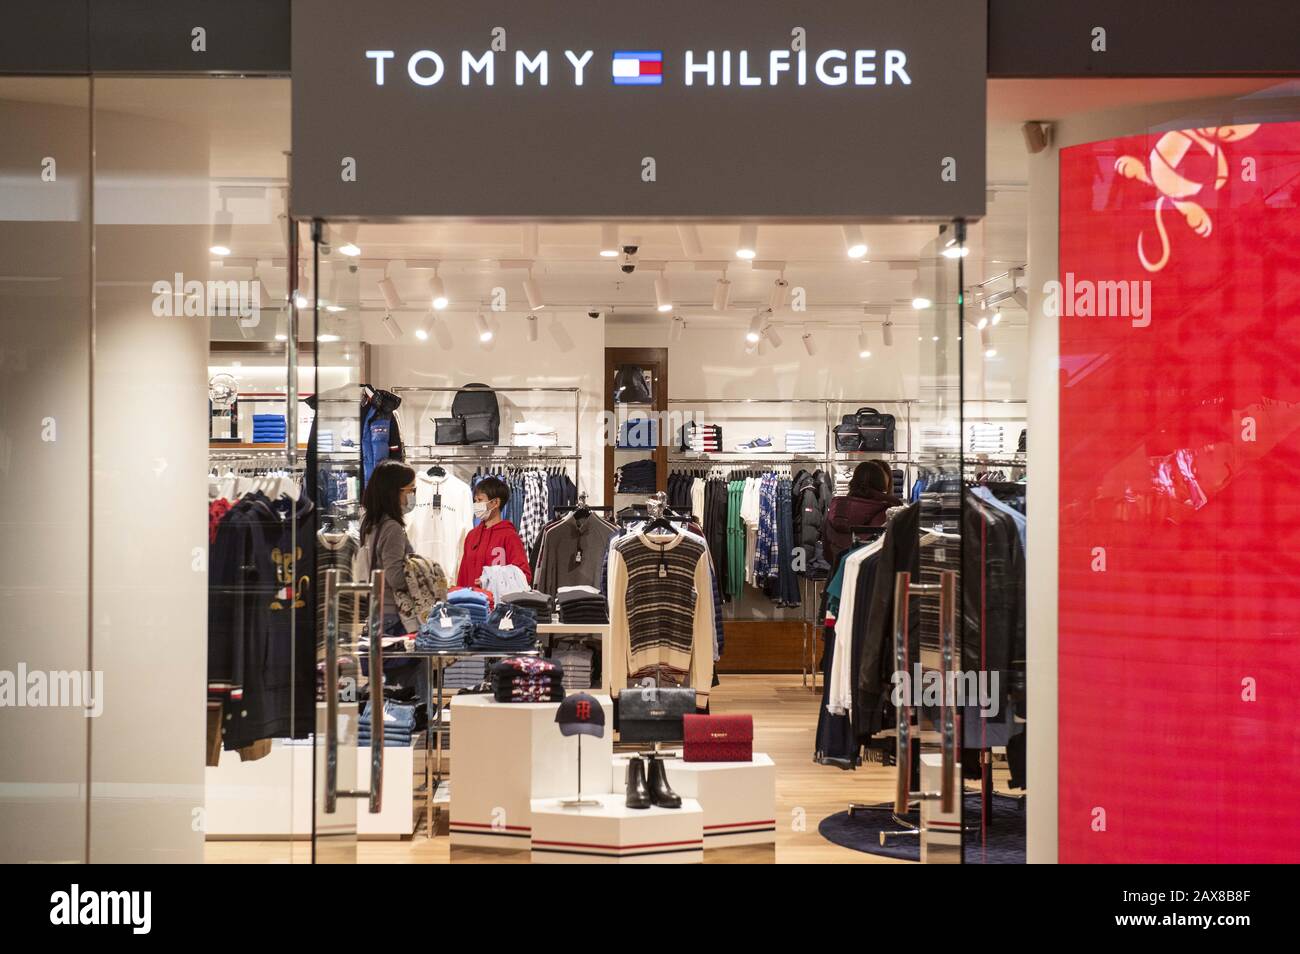 Tommy Hilfiger Outlet in Hong Kong Editorial Photography - Image